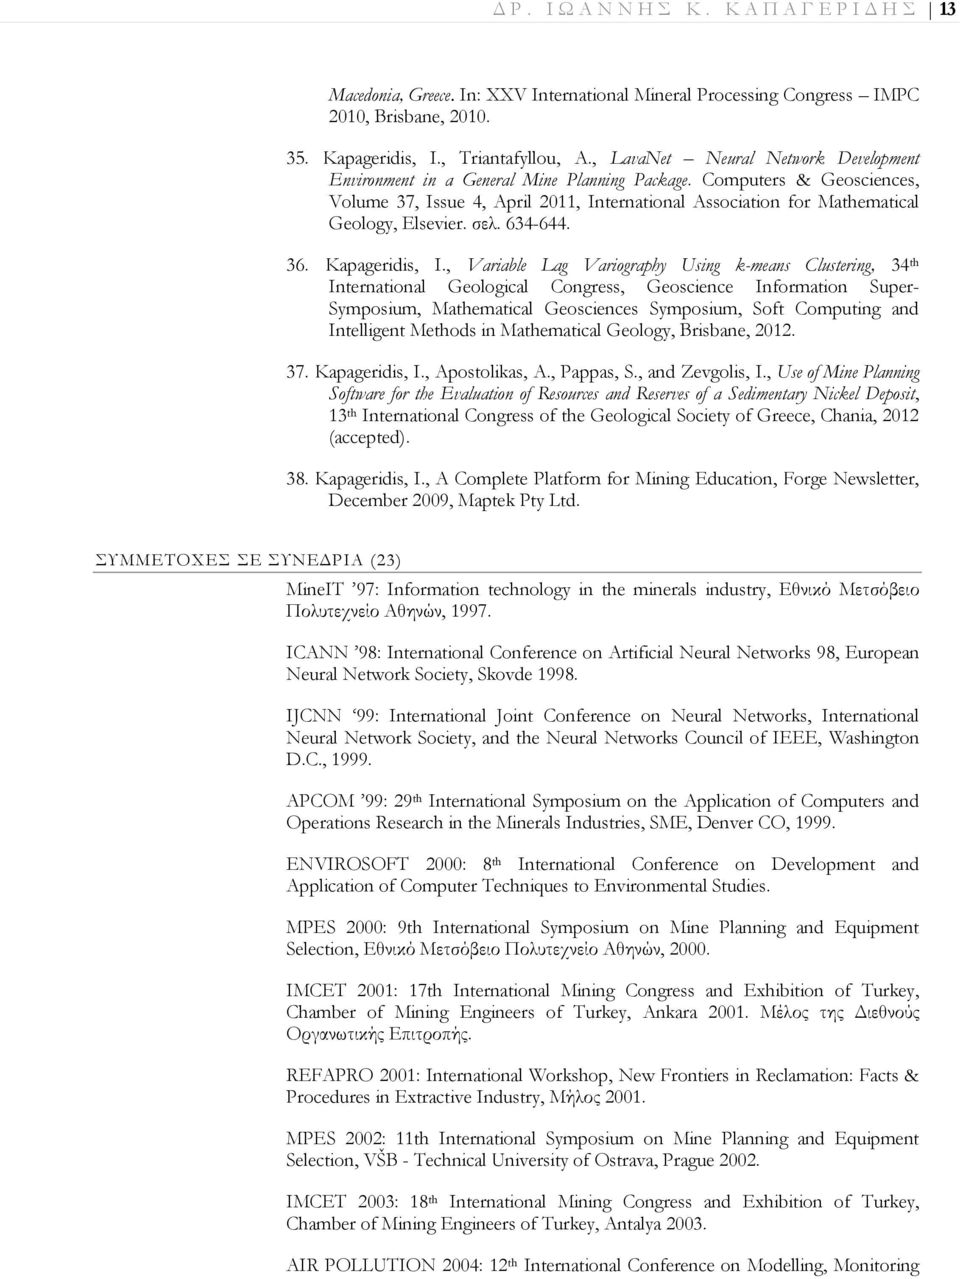 Computers & Geosciences, Volume 37, Issue 4, April 2011, International Association for Mathematical Geology, Elsevier. σελ. 634-644. 36. Kapageridis, I.